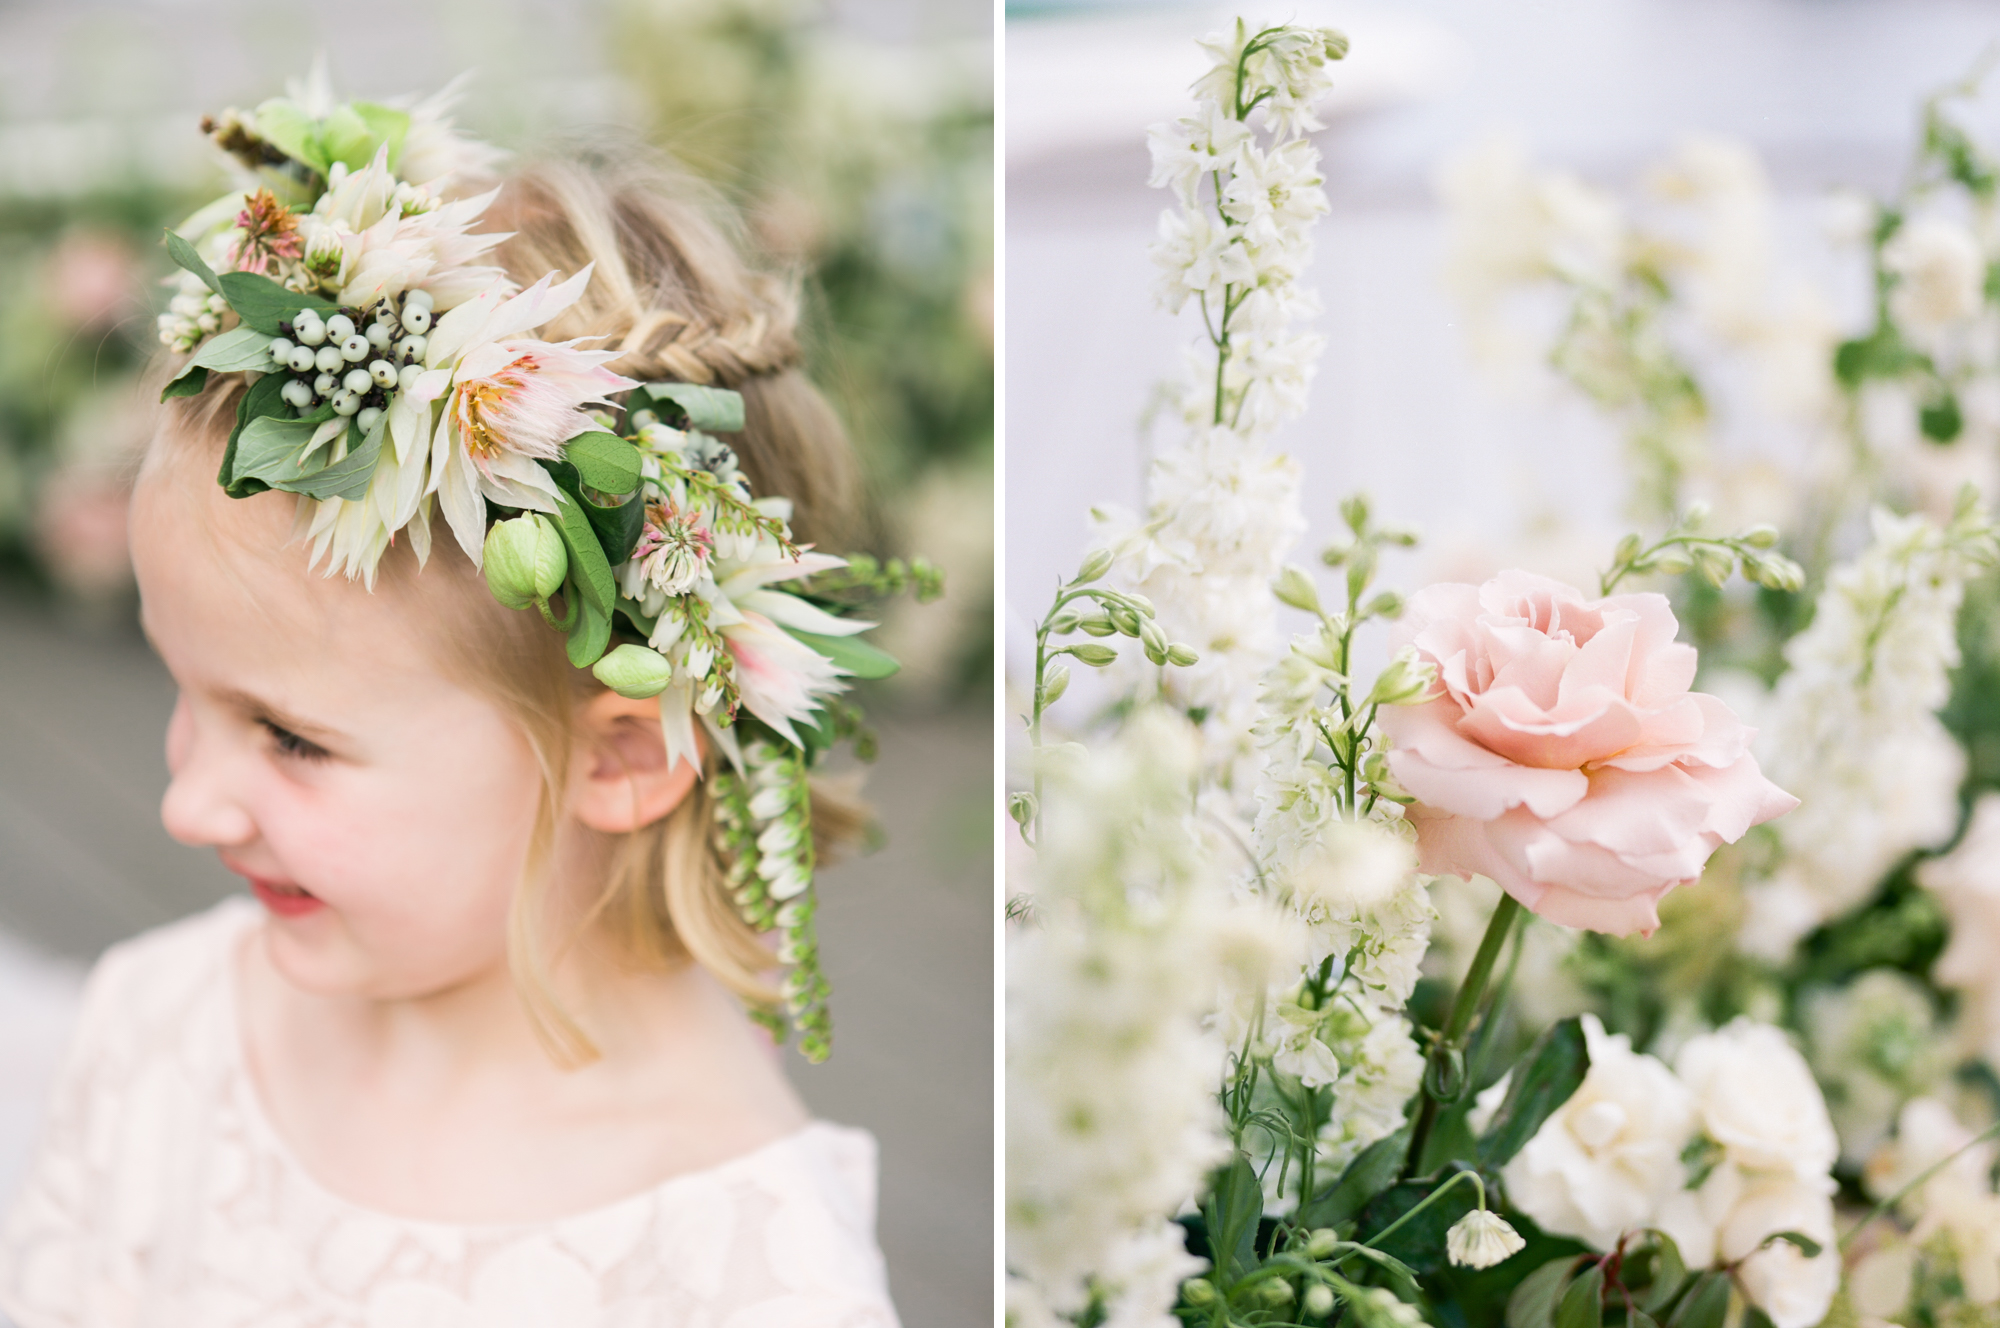 Flower Crown by Bows and Arrows. Photo by Rachel Havel